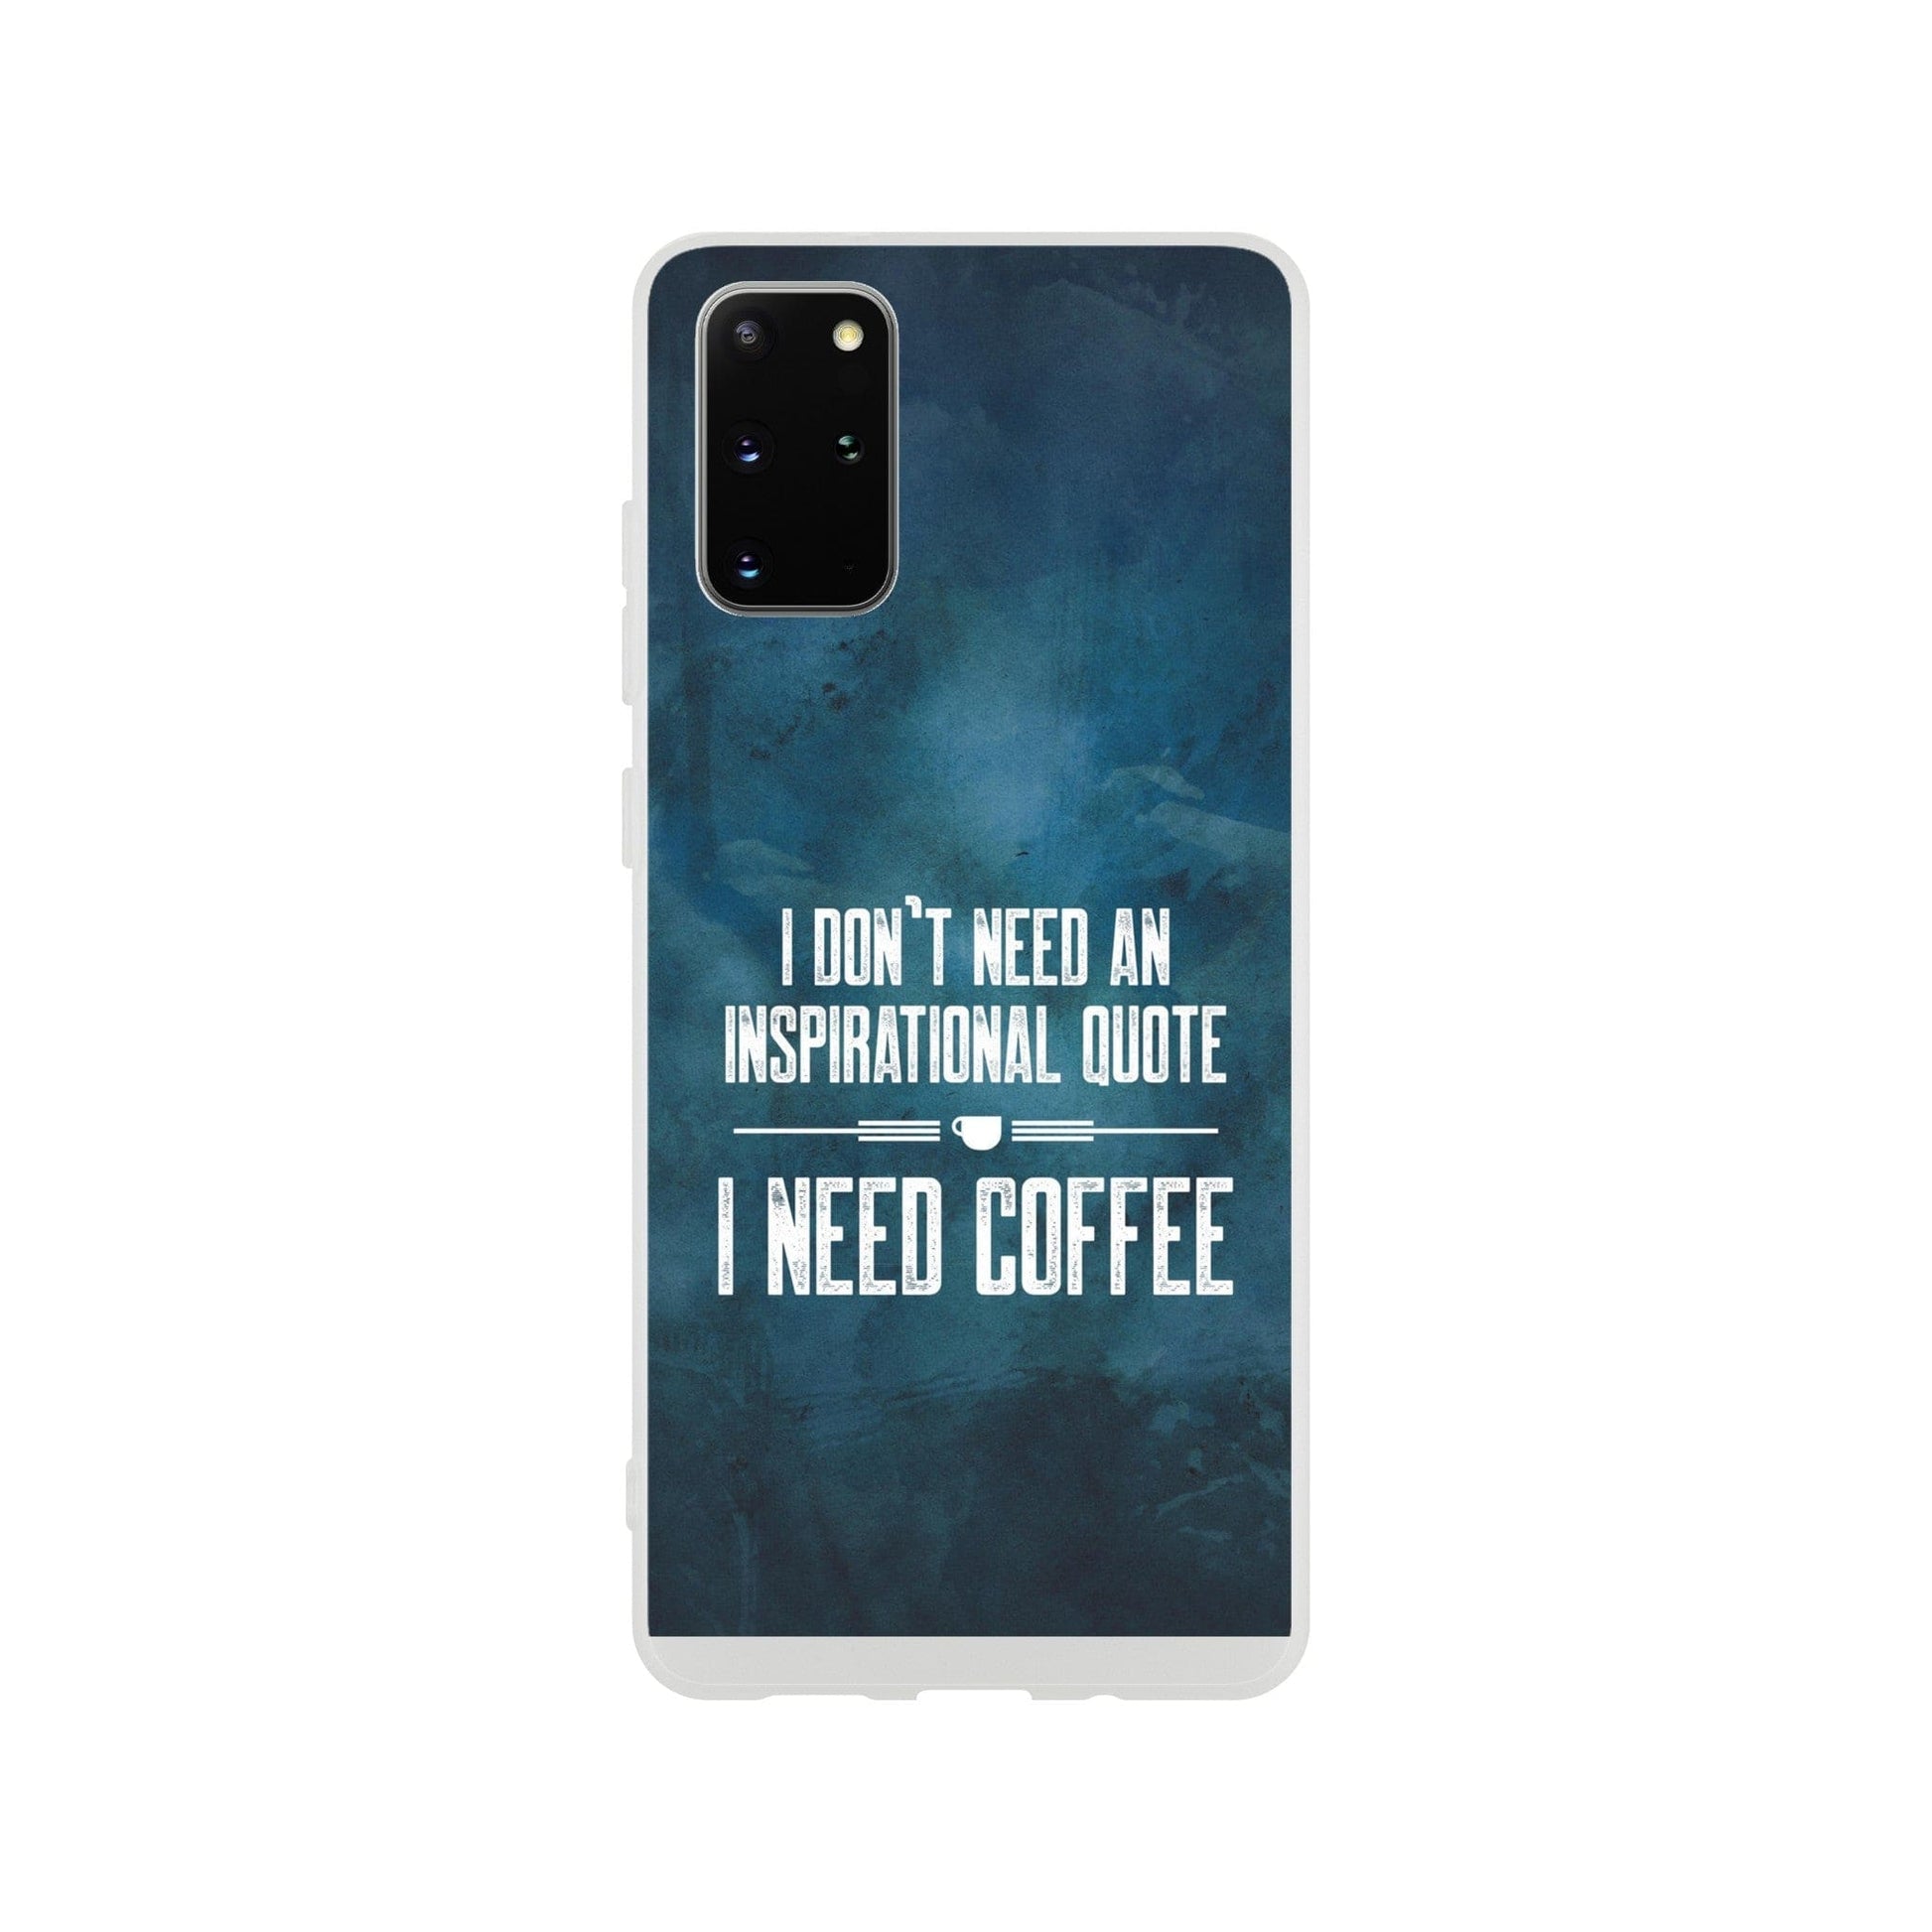 Good Bean Gifts "Coffee not Quotes" Flexi Cell Phone Case Galaxy S20 Plus